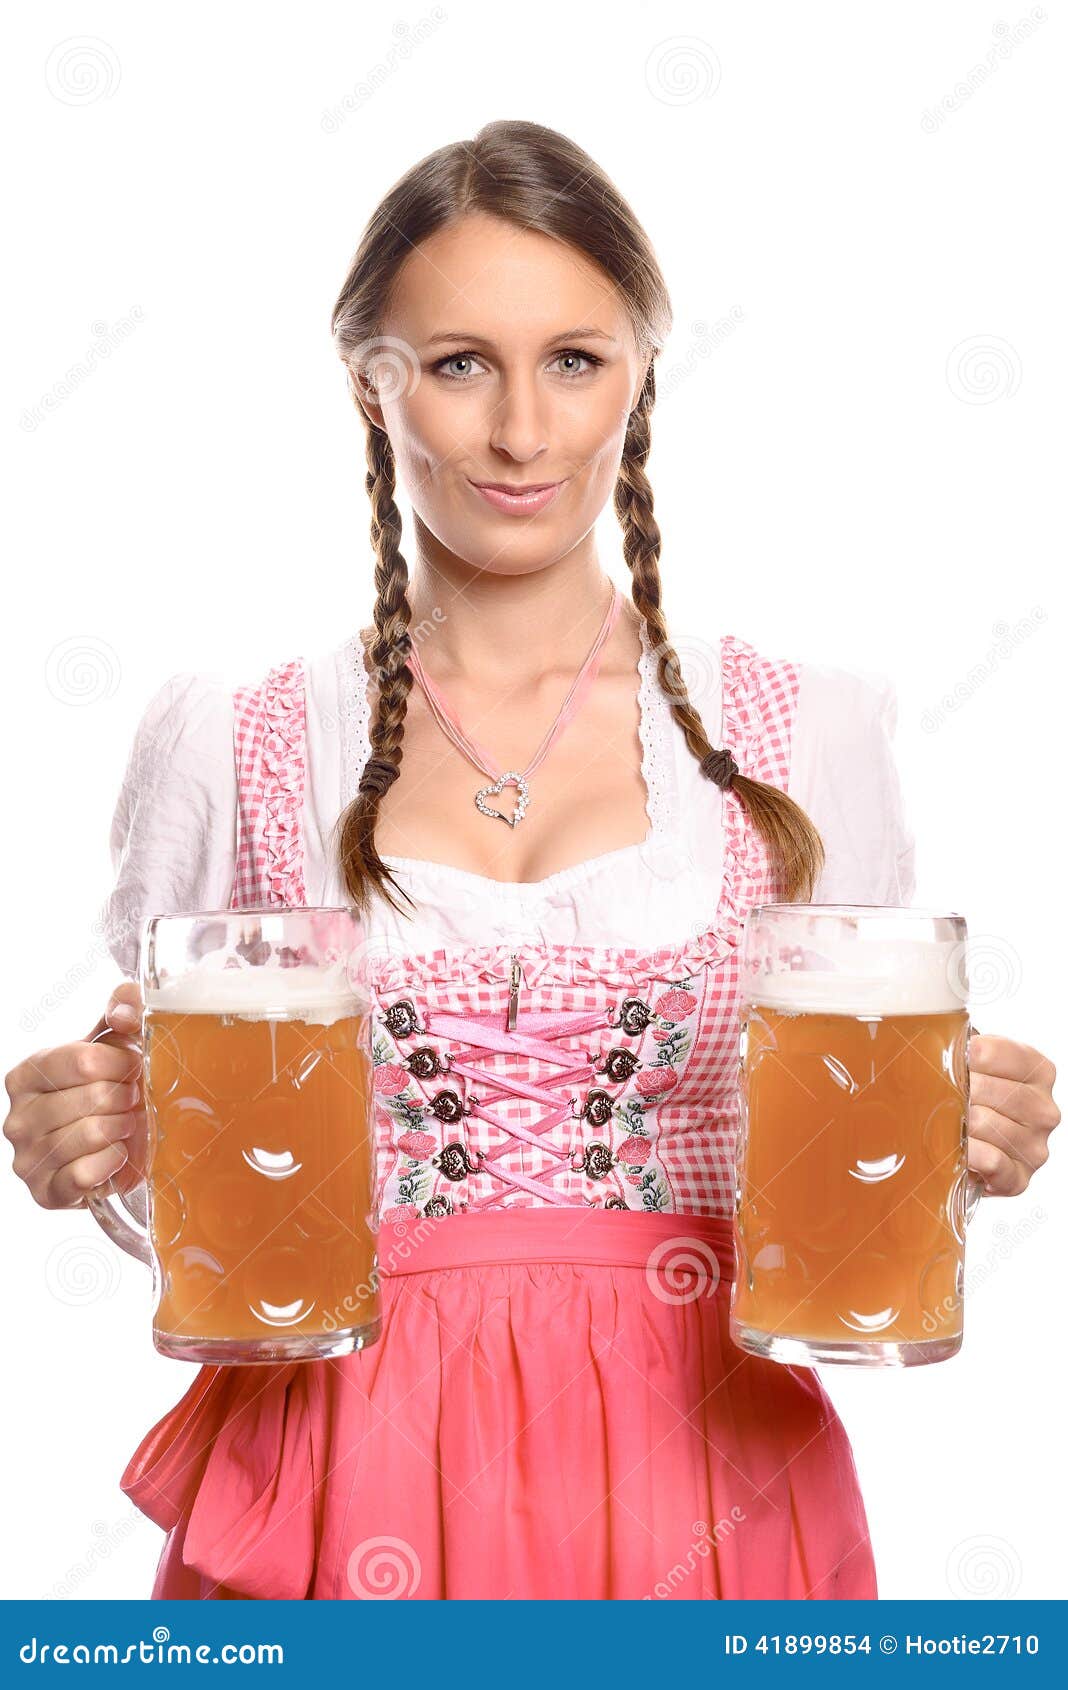 German or Bavarian Waitress with Beer Mugs Stock Photo - Image of ...